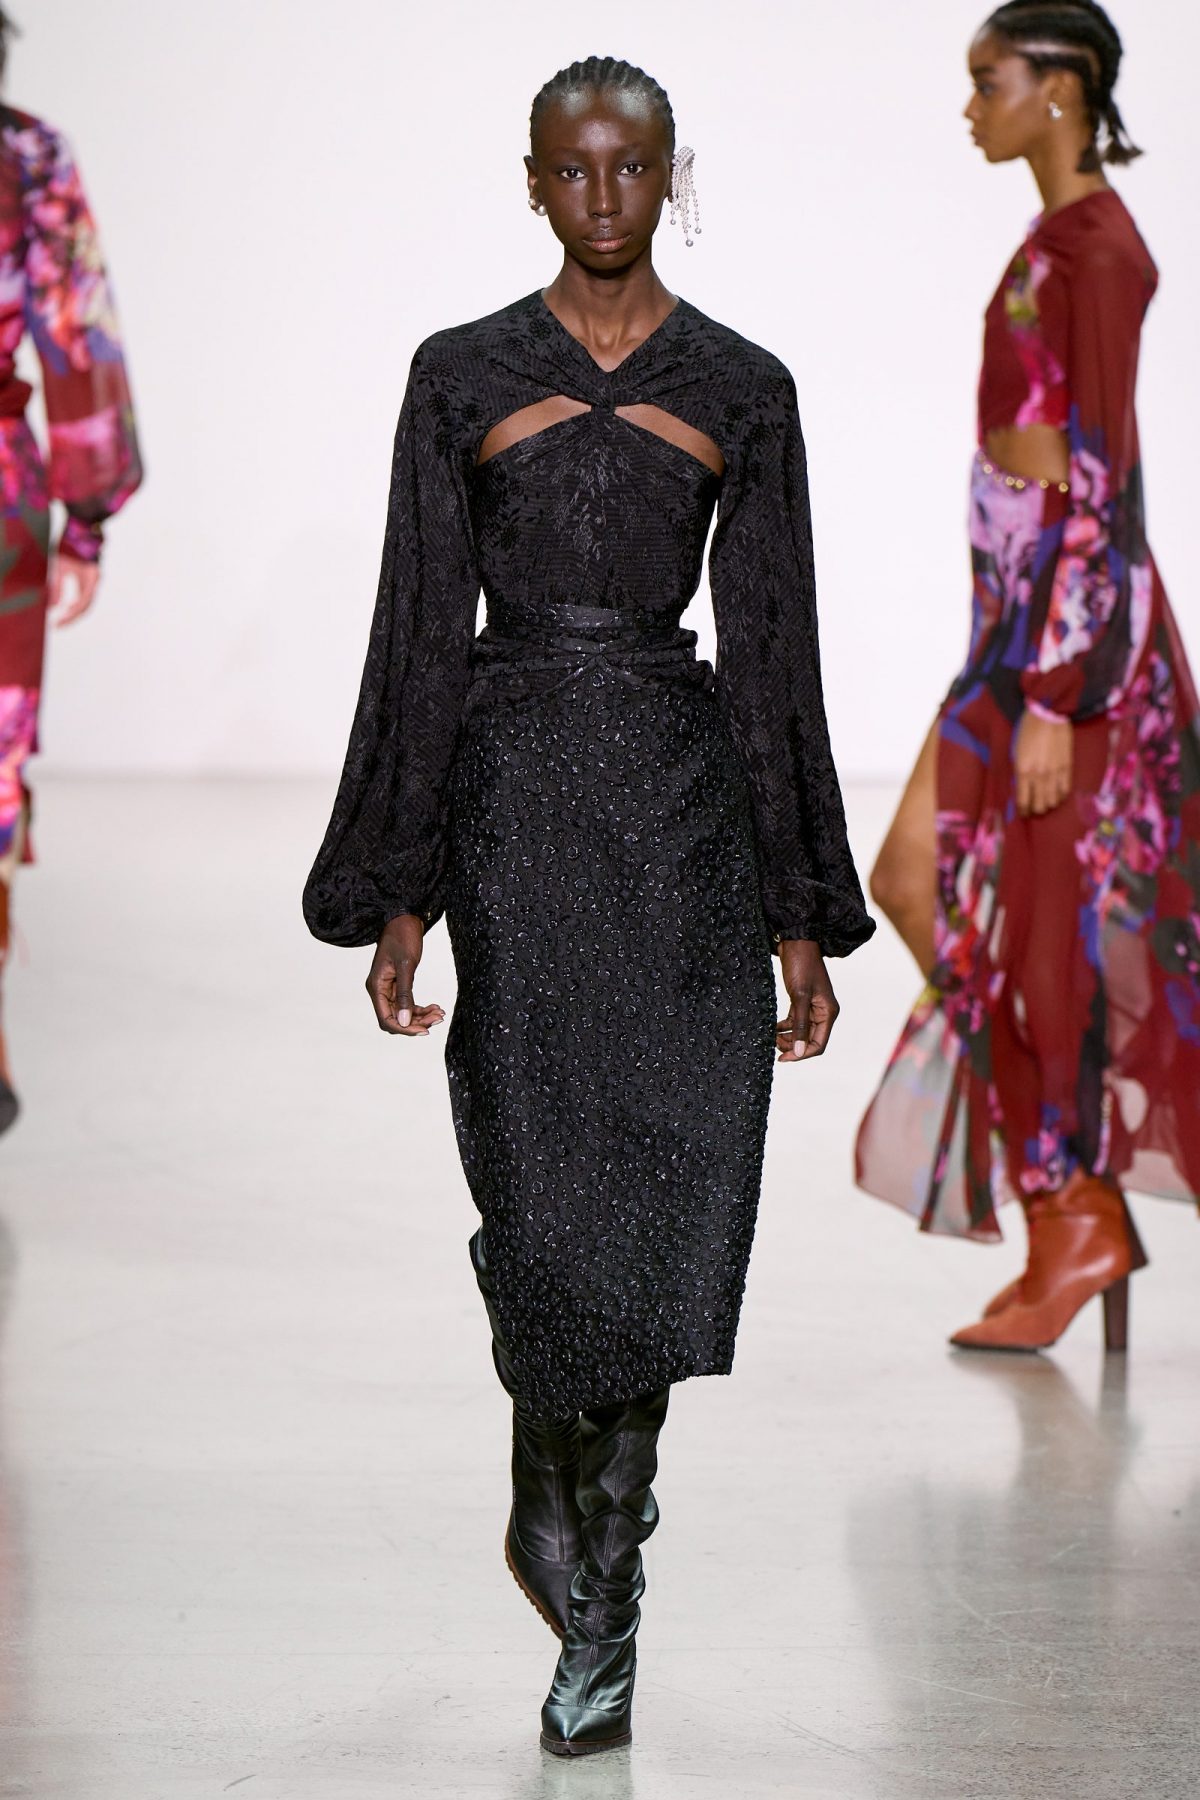 10 Of The Best Looks From New York Fashion Week Fall/Winter 2022 Show